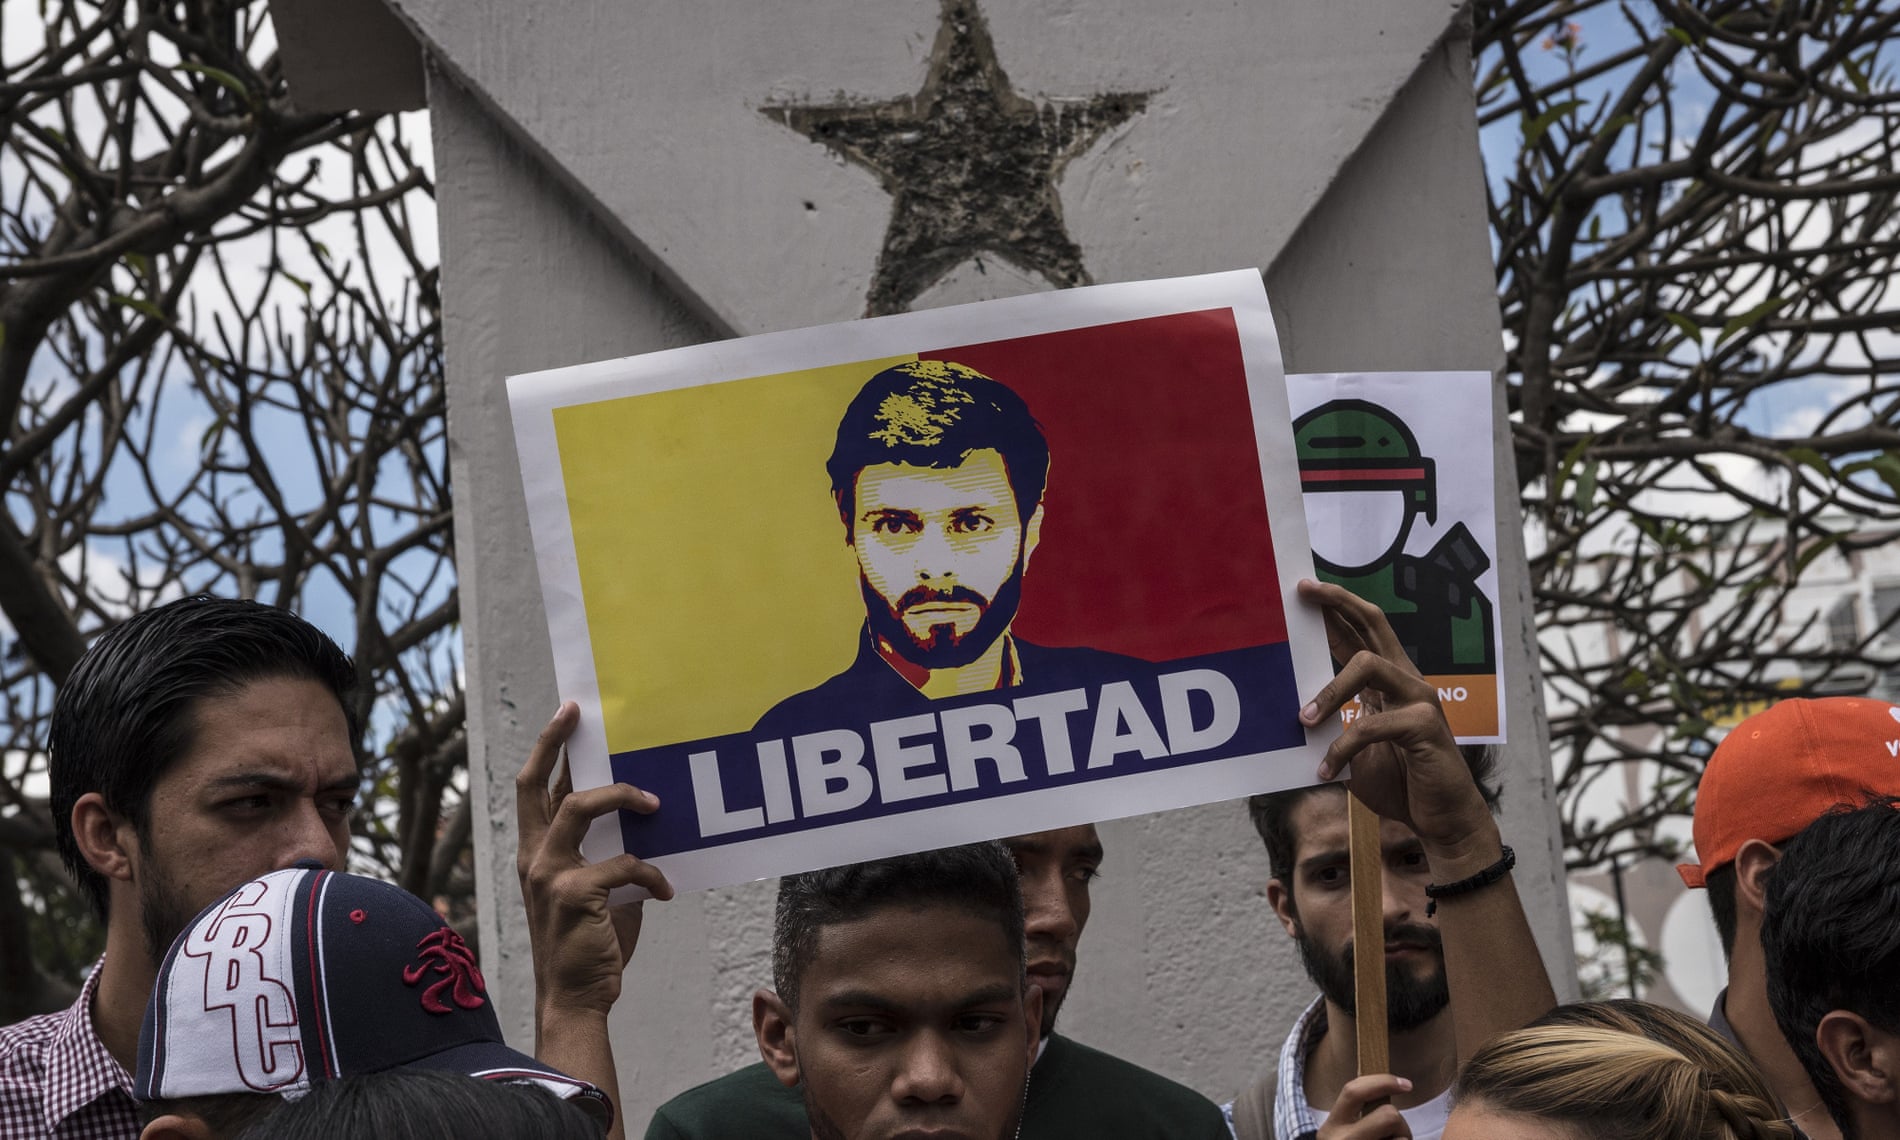 A man holds a poster of the opposition leader Leopoldo López, who is under house arrest, during a protest in Caracas on 30 January 2019.